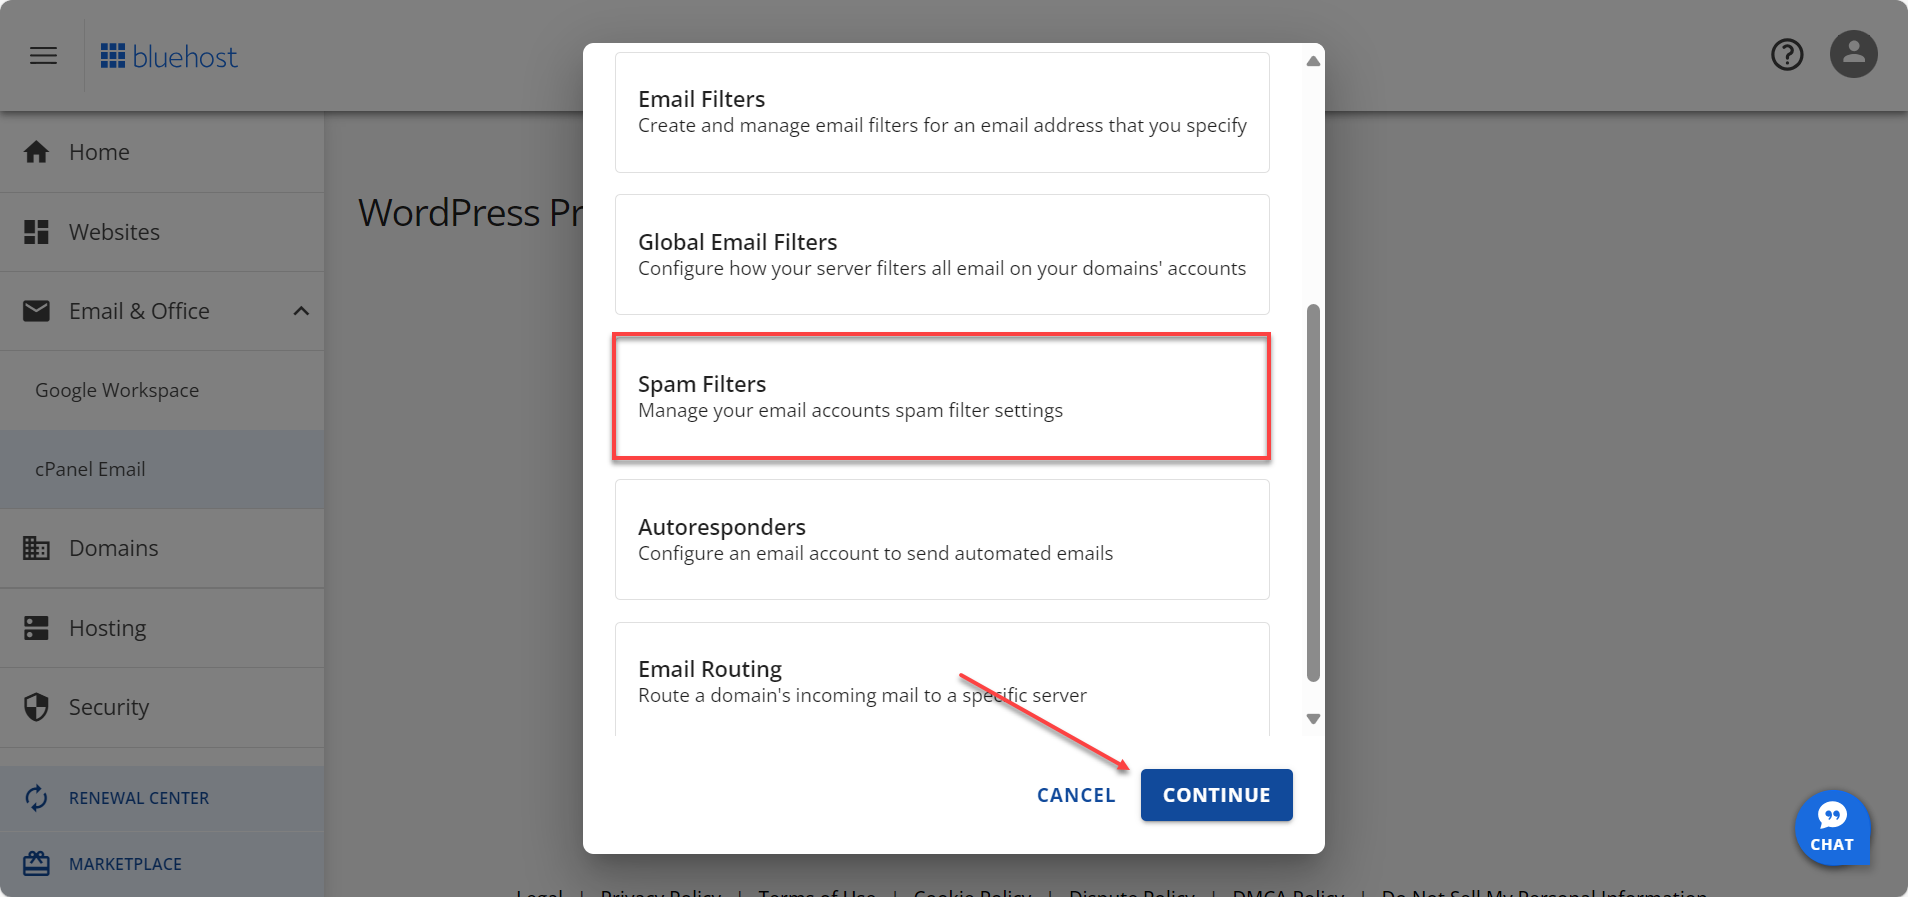 Spam Filters option and blue Continue button